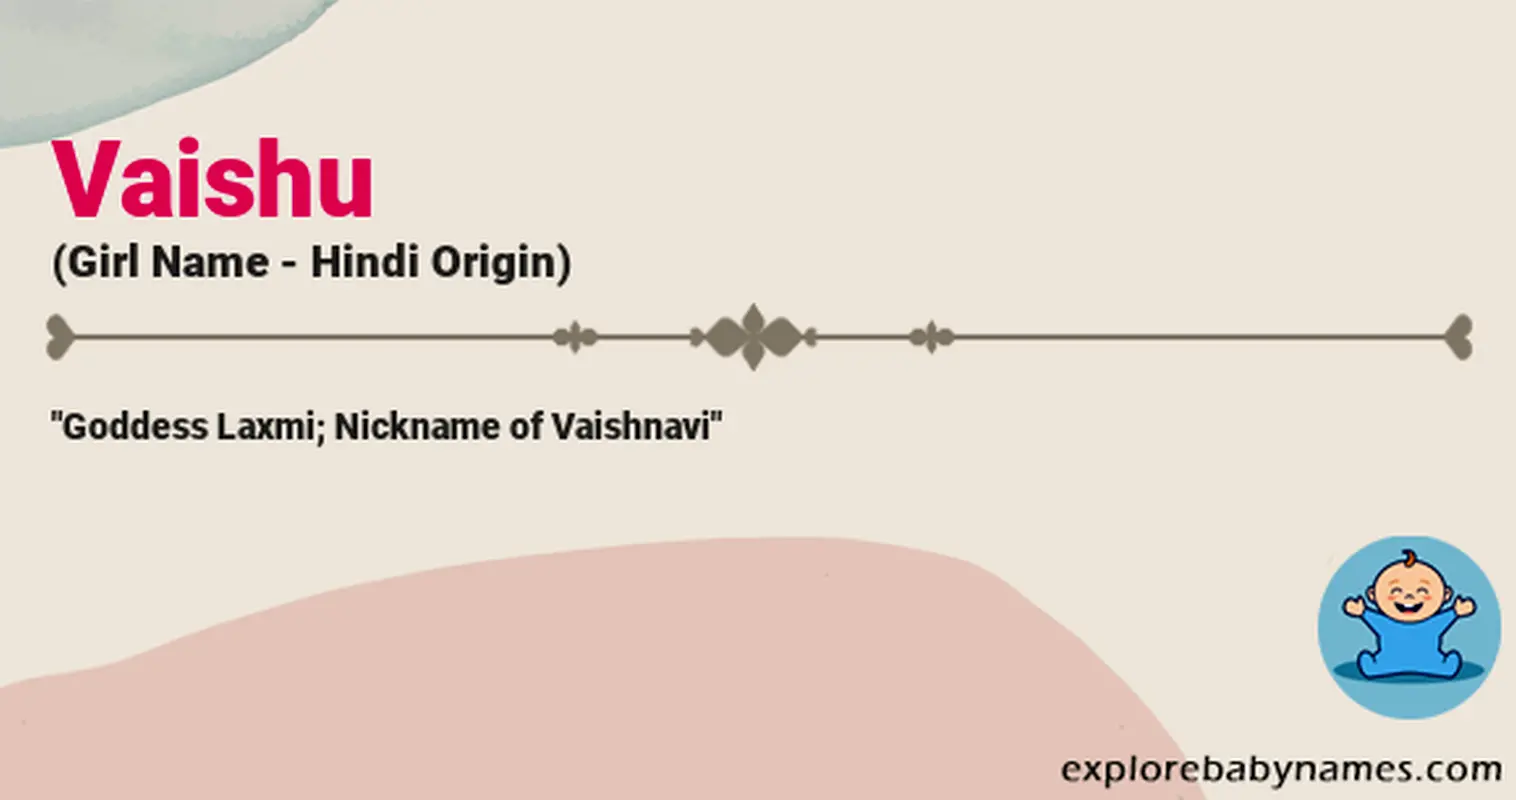 Meaning of Vaishu